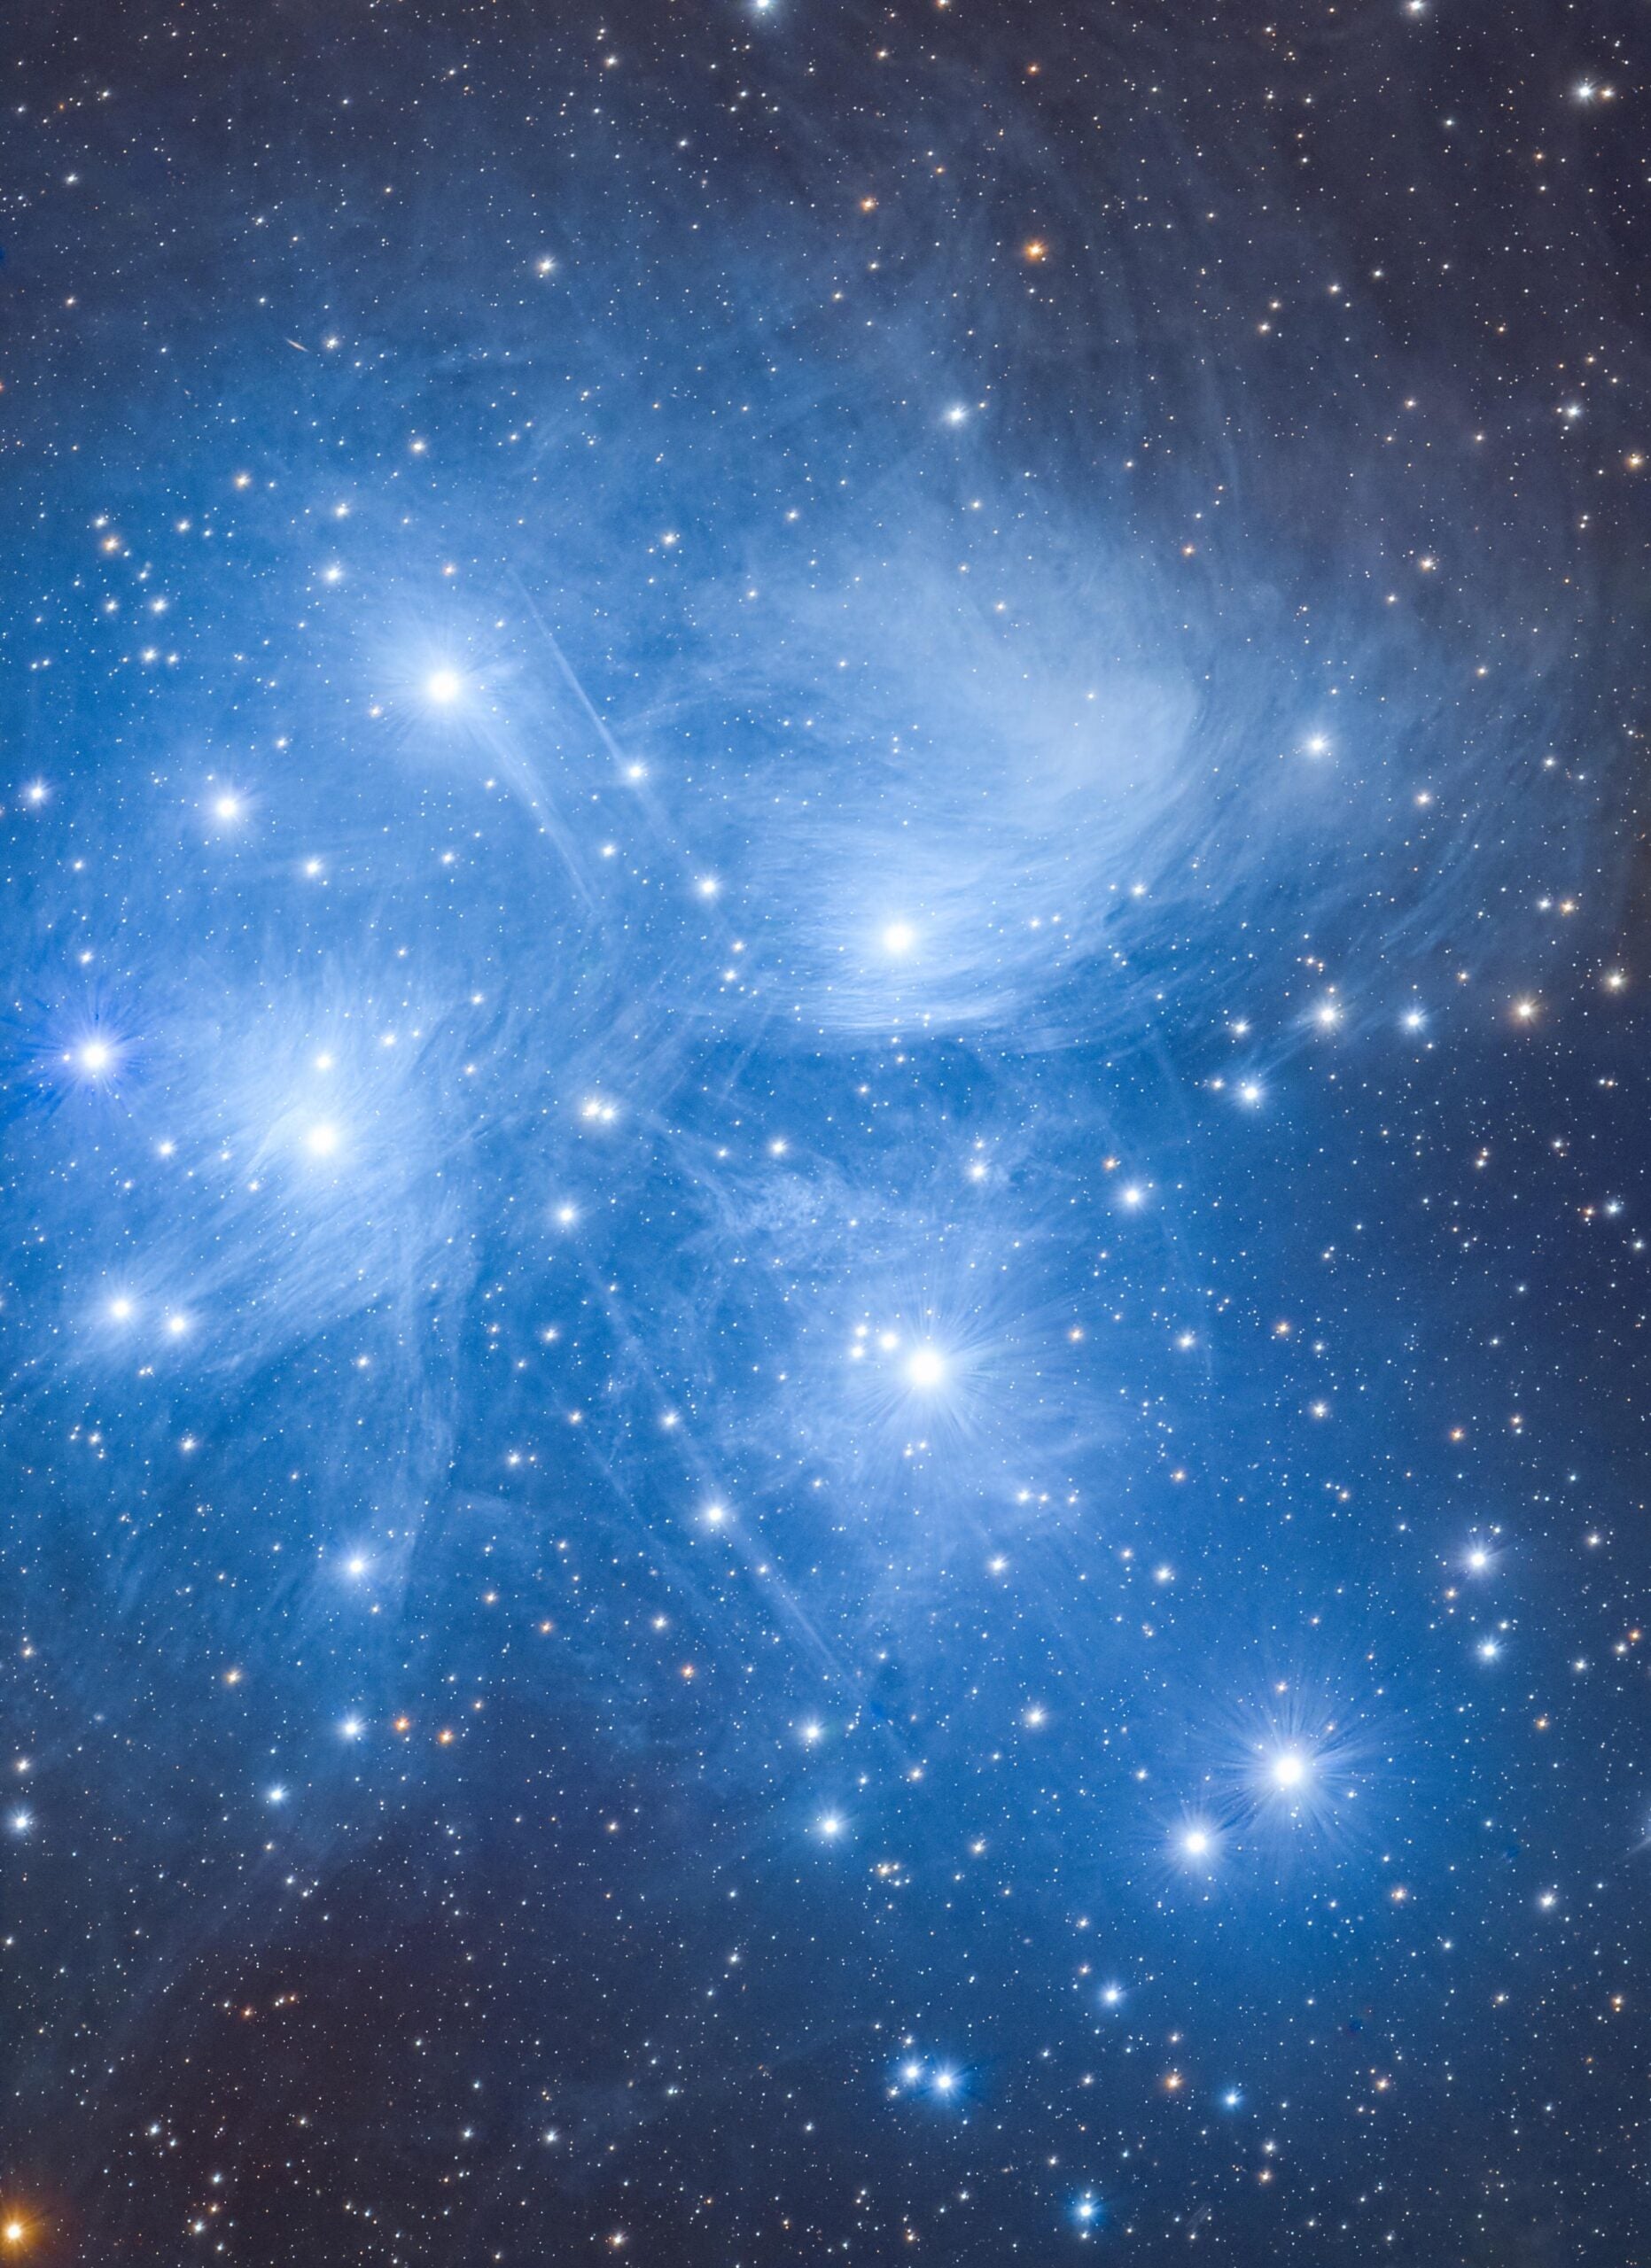 Seven Sisters star cluster shining brightly